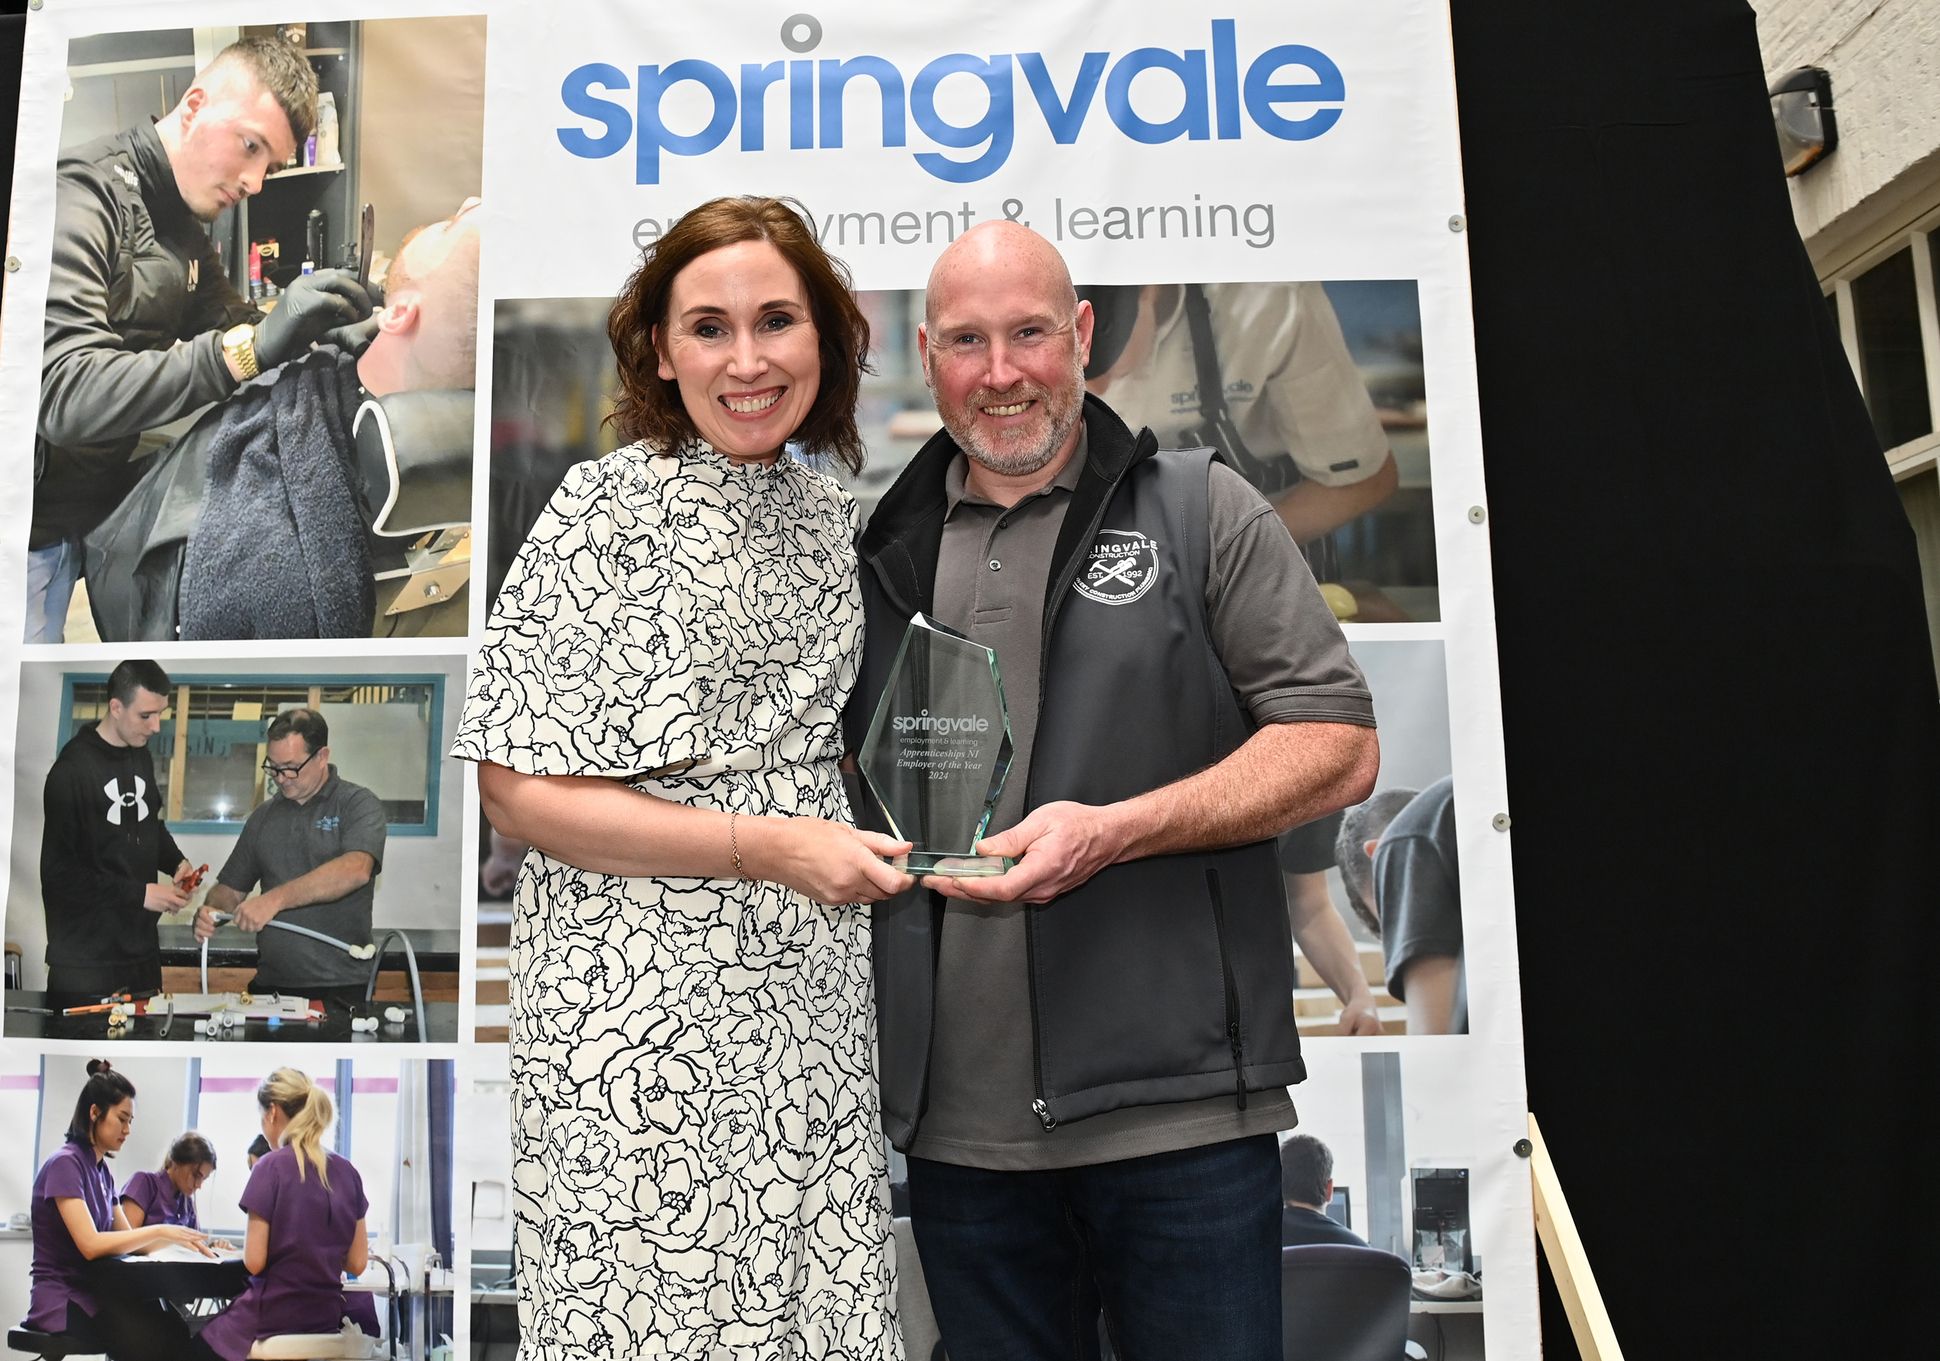 Apprenticeships NI Employer of the Year, PK Murphy is presented with his award by Raymond McKenna (Springvale Construction Co-Ordinator)